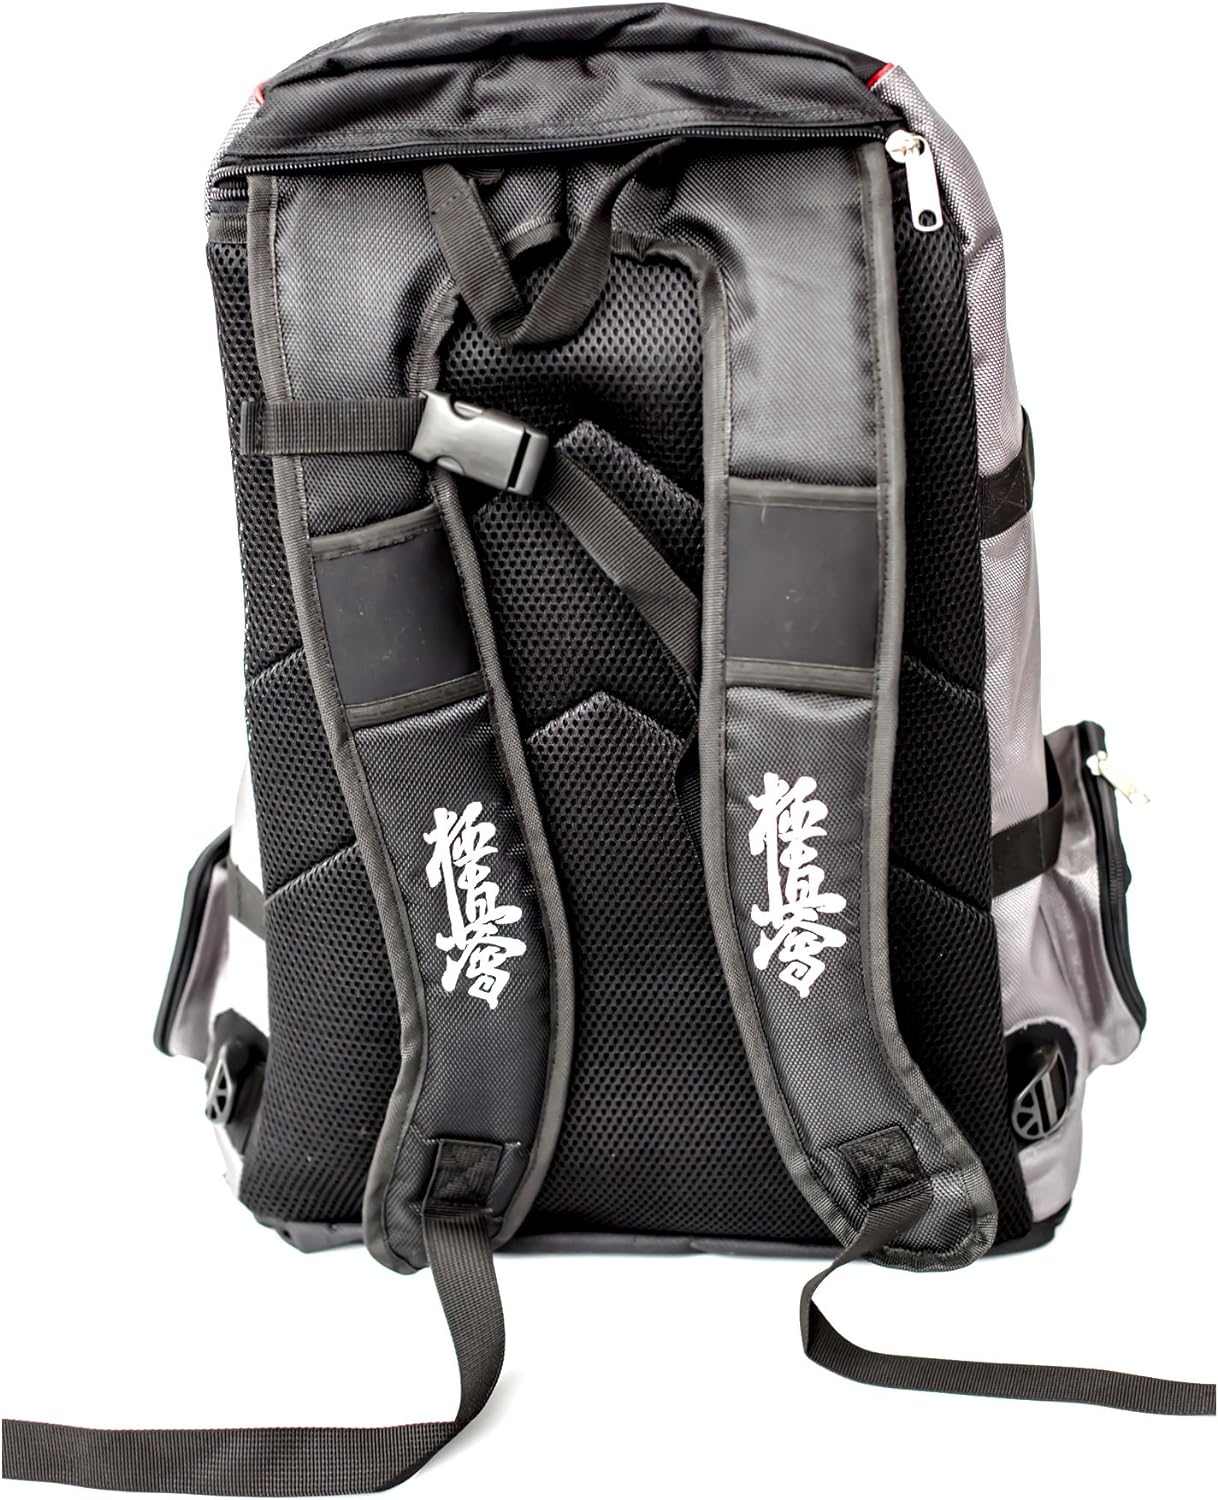 sports-gym-bag-with-shoe-compartment